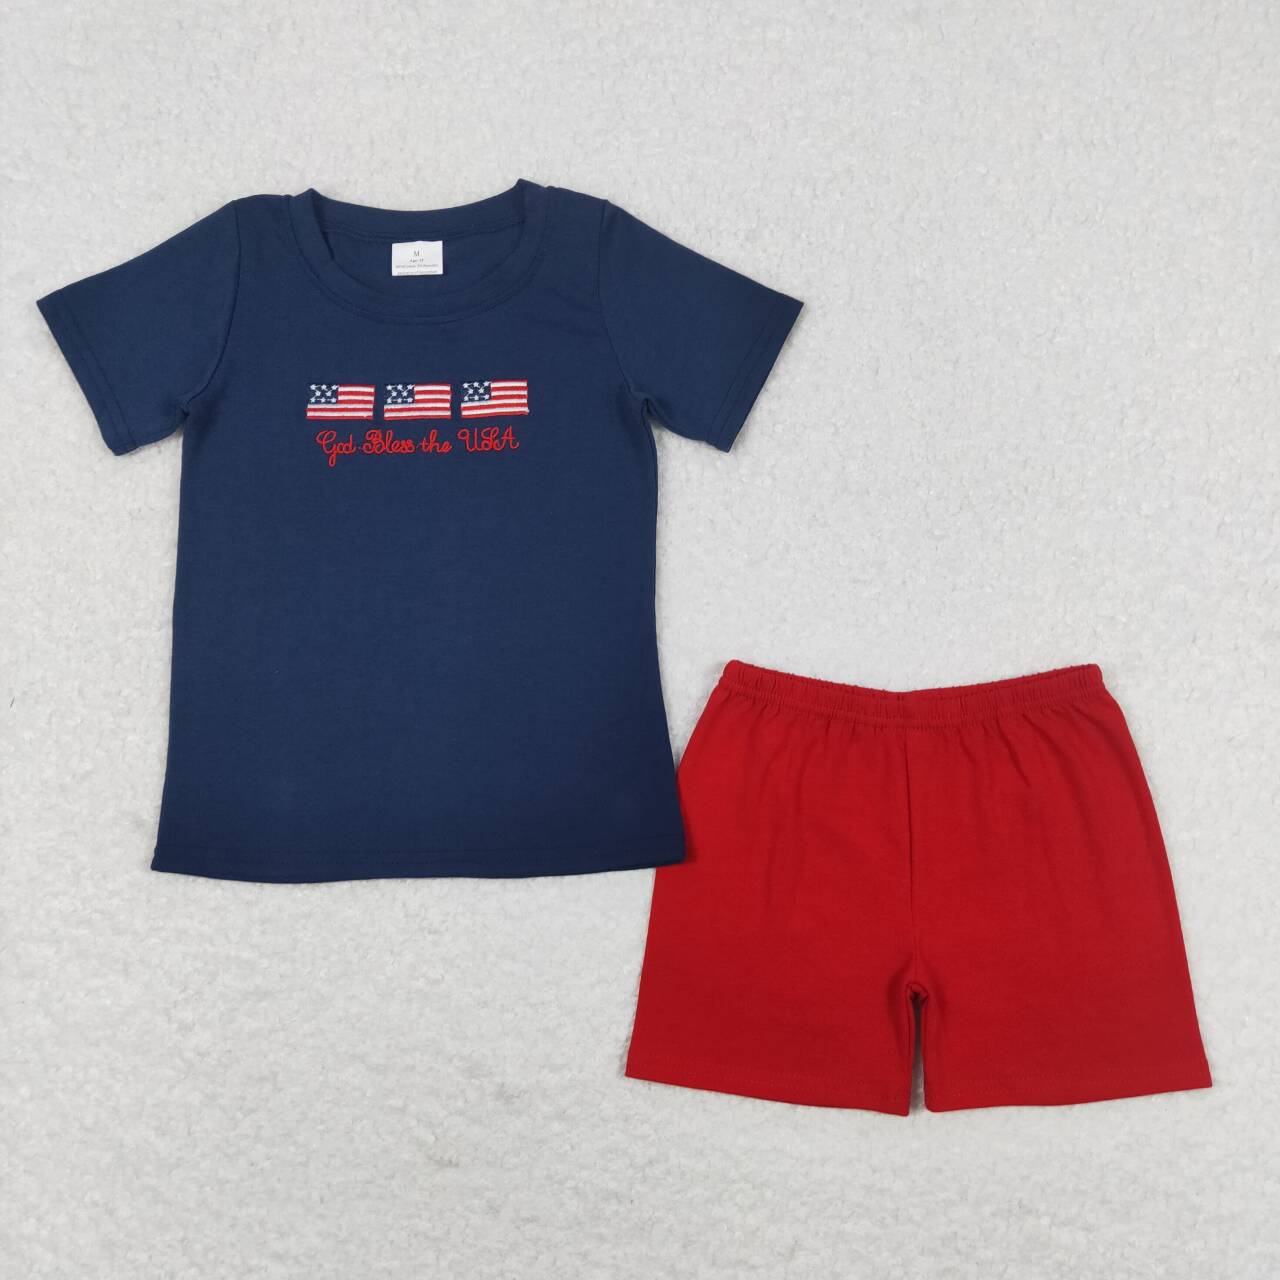 BSSO0713 July 4th kids boys summer clothes short sleeve top + shorts 2 pieces set